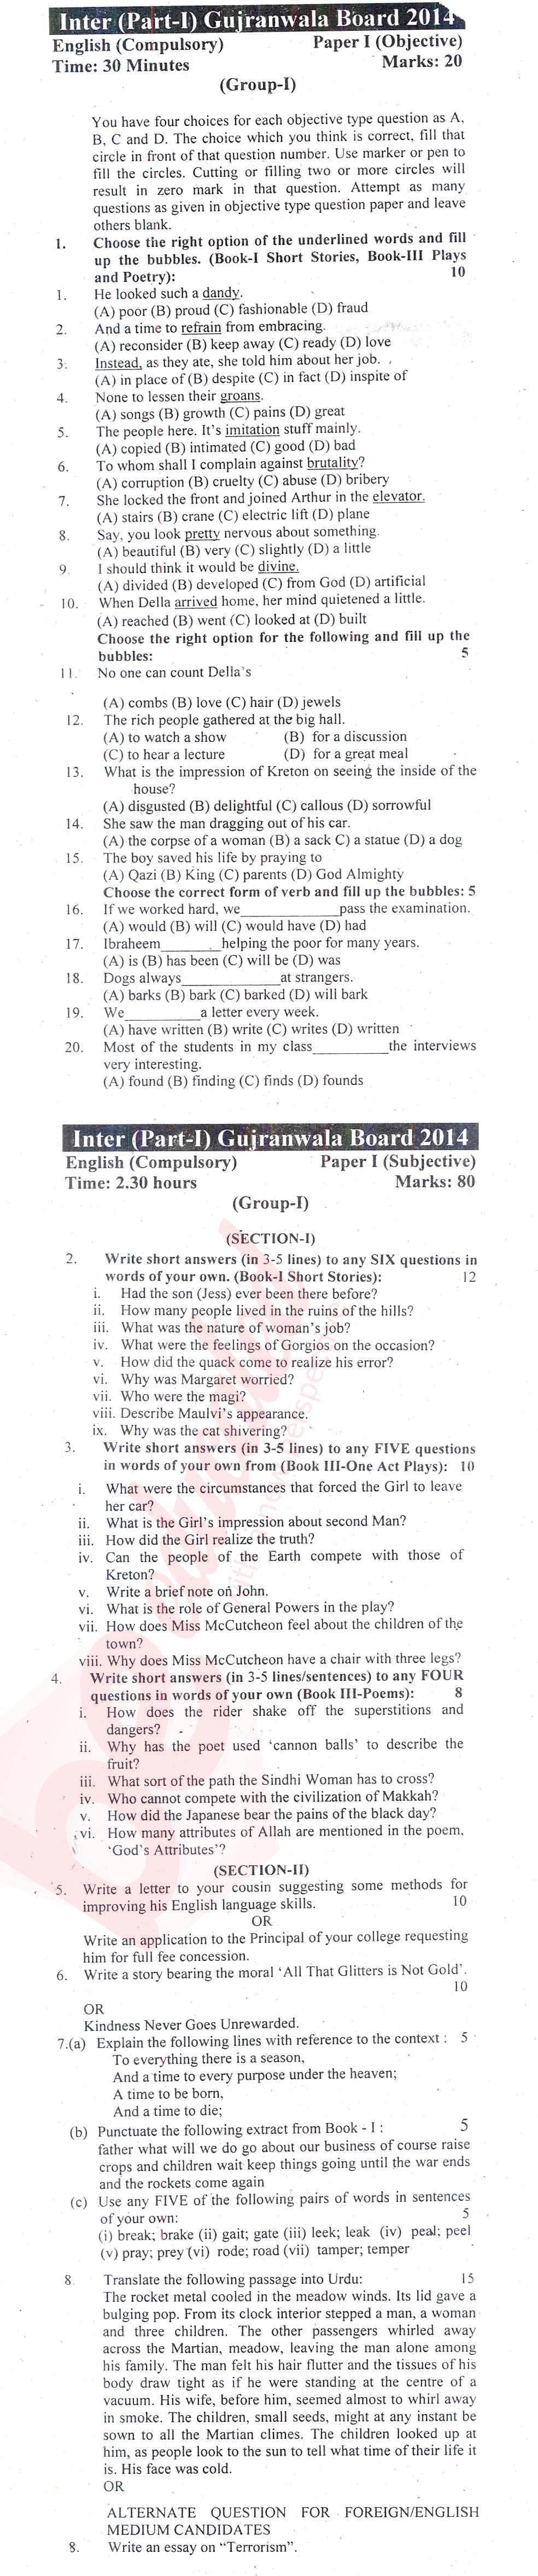 English 11th class Past Paper Group 1 BISE Gujranwala 2014